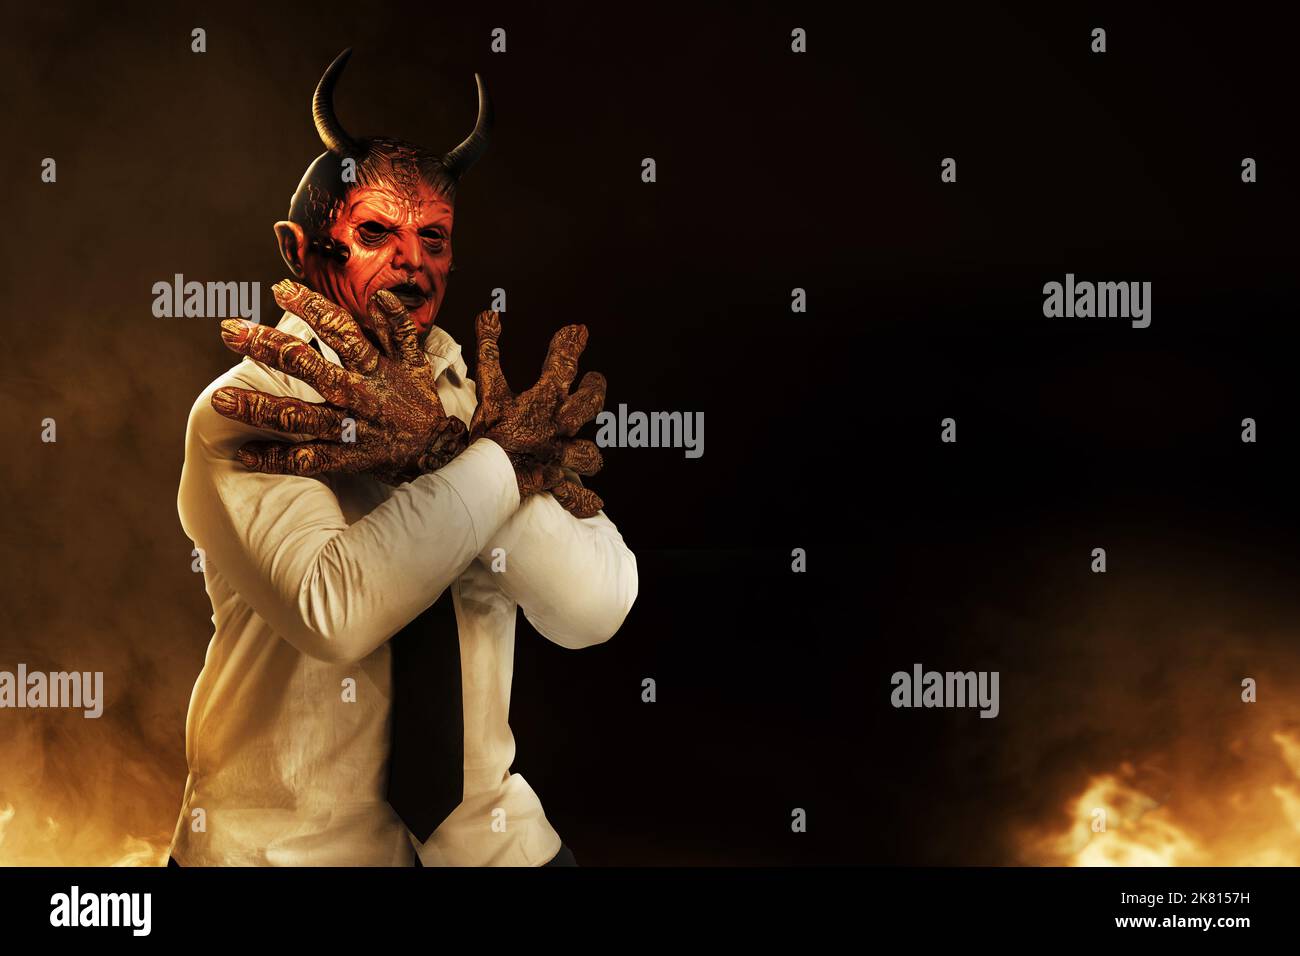 Devilman is standing in the fire's background. Halloween concept Stock Photo